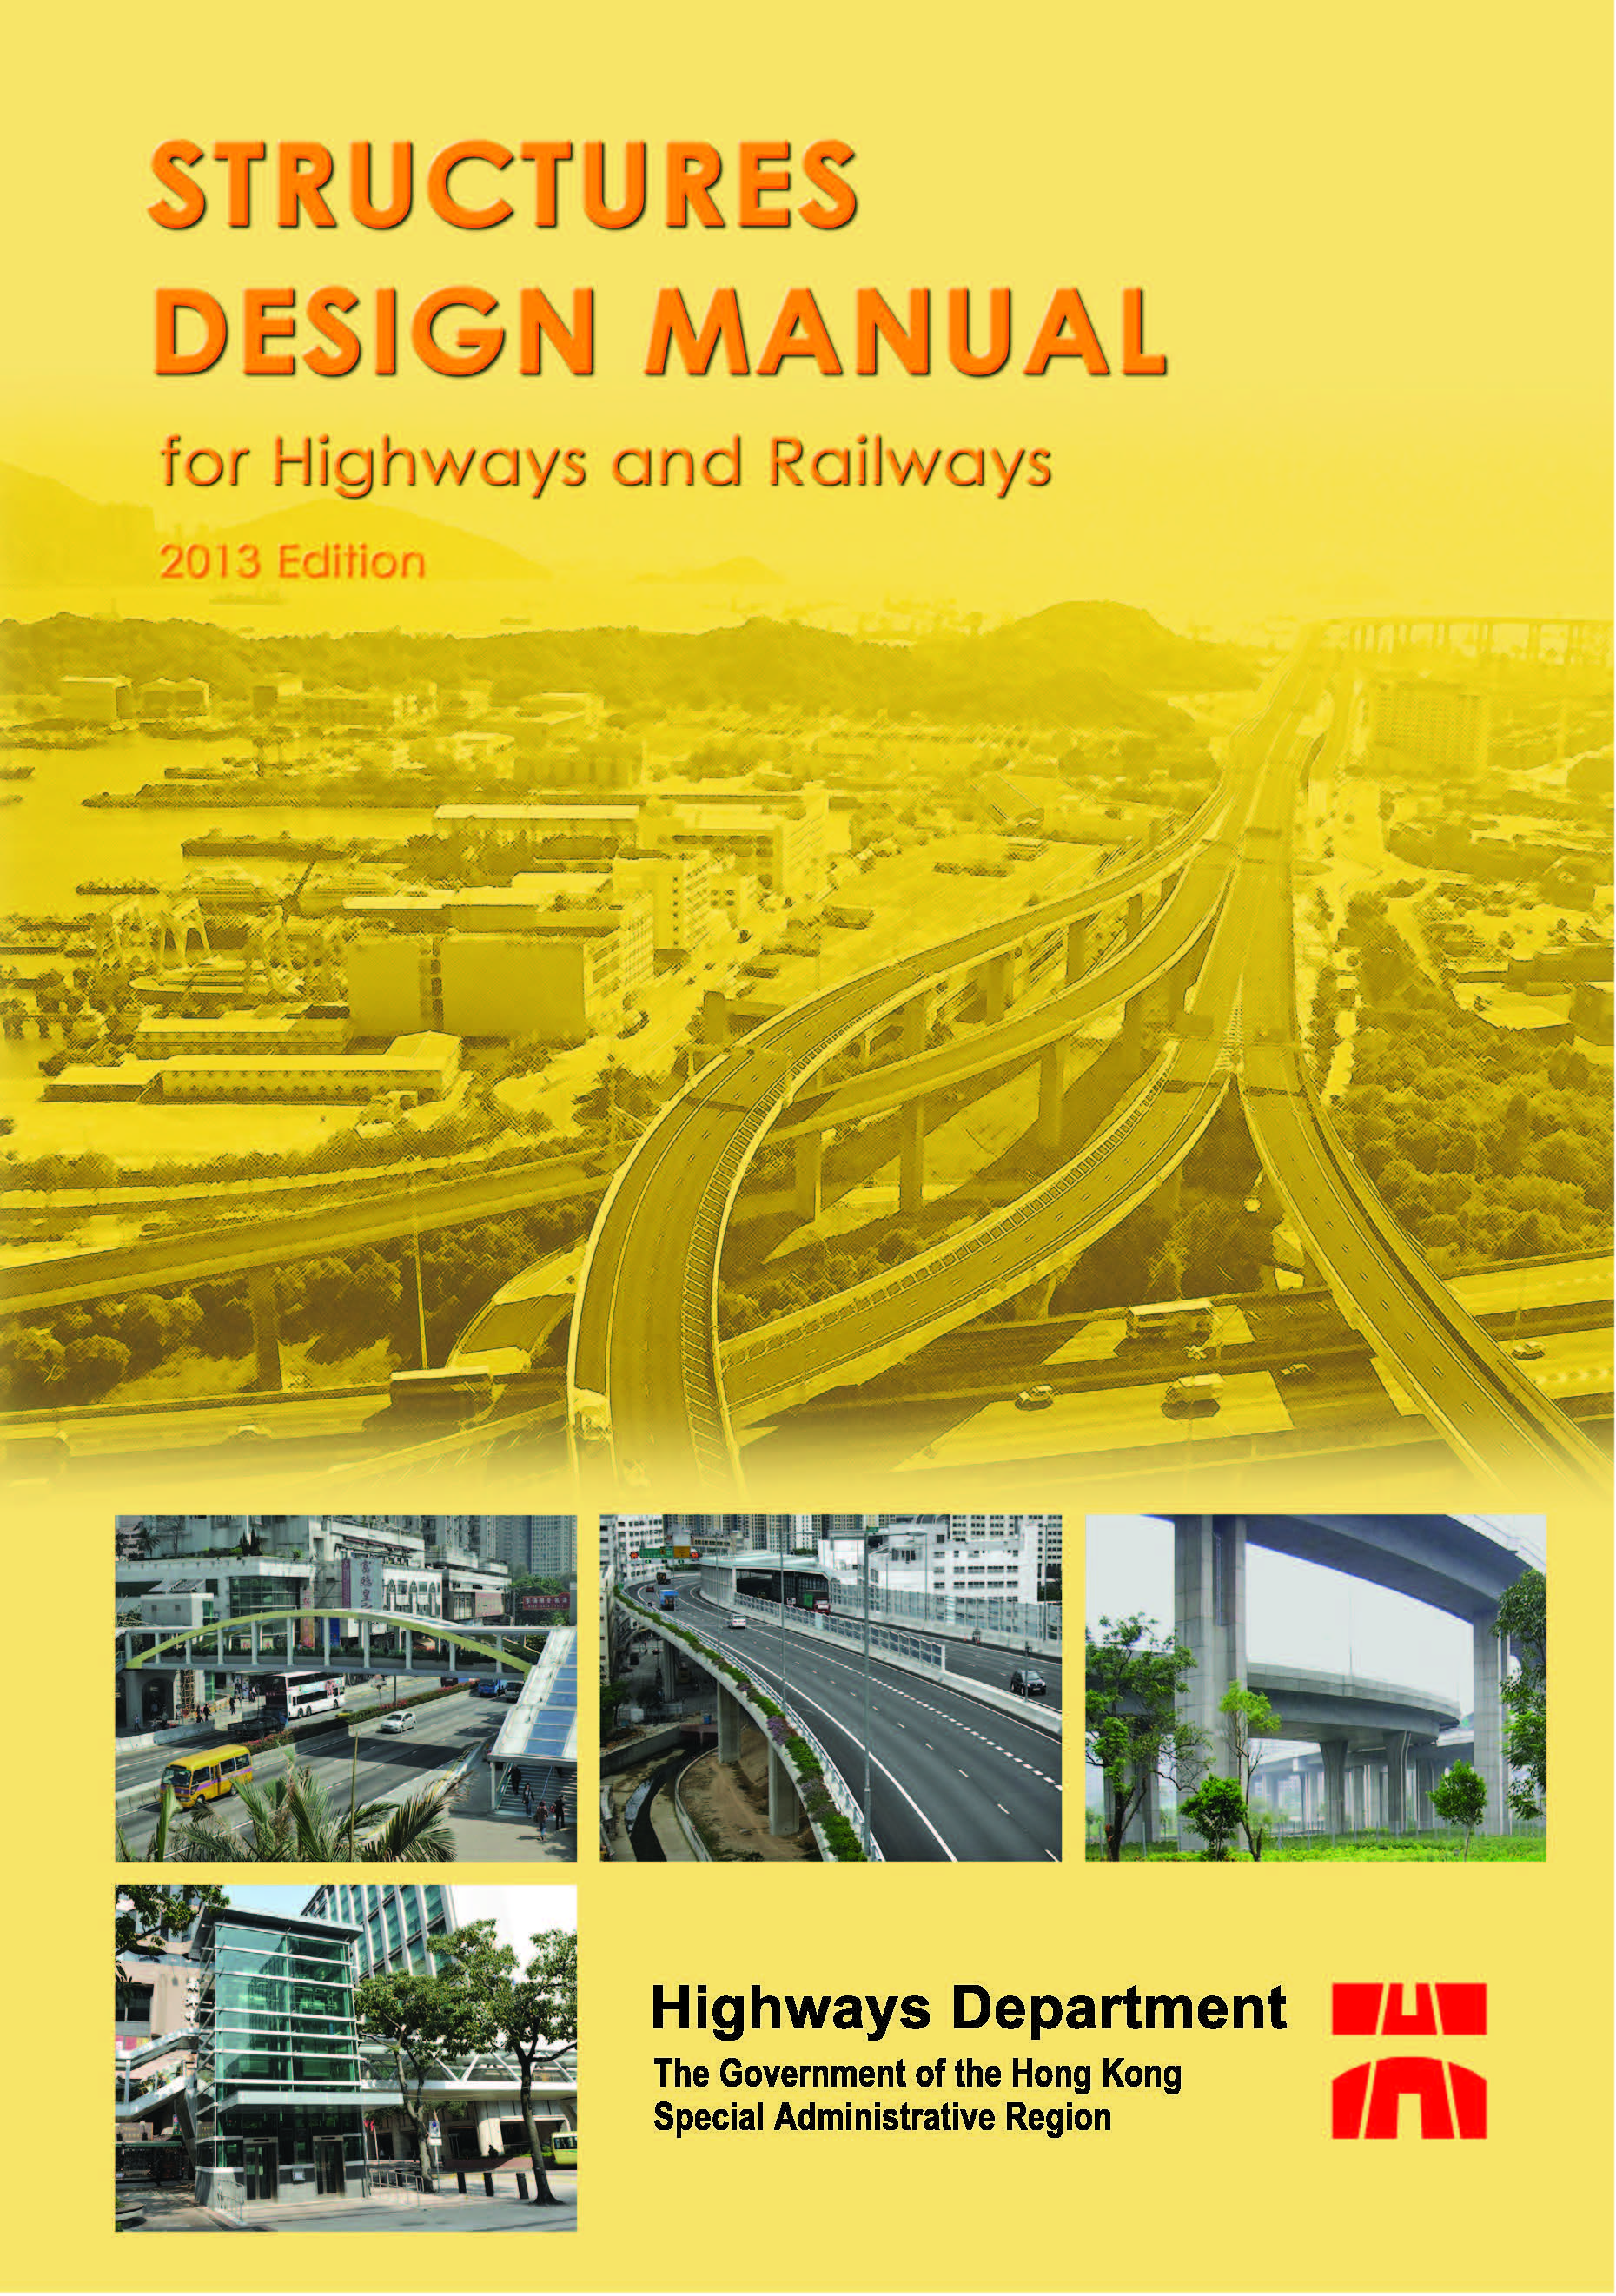 Structures Design Manual for Highways and Railways (2013 Edition)